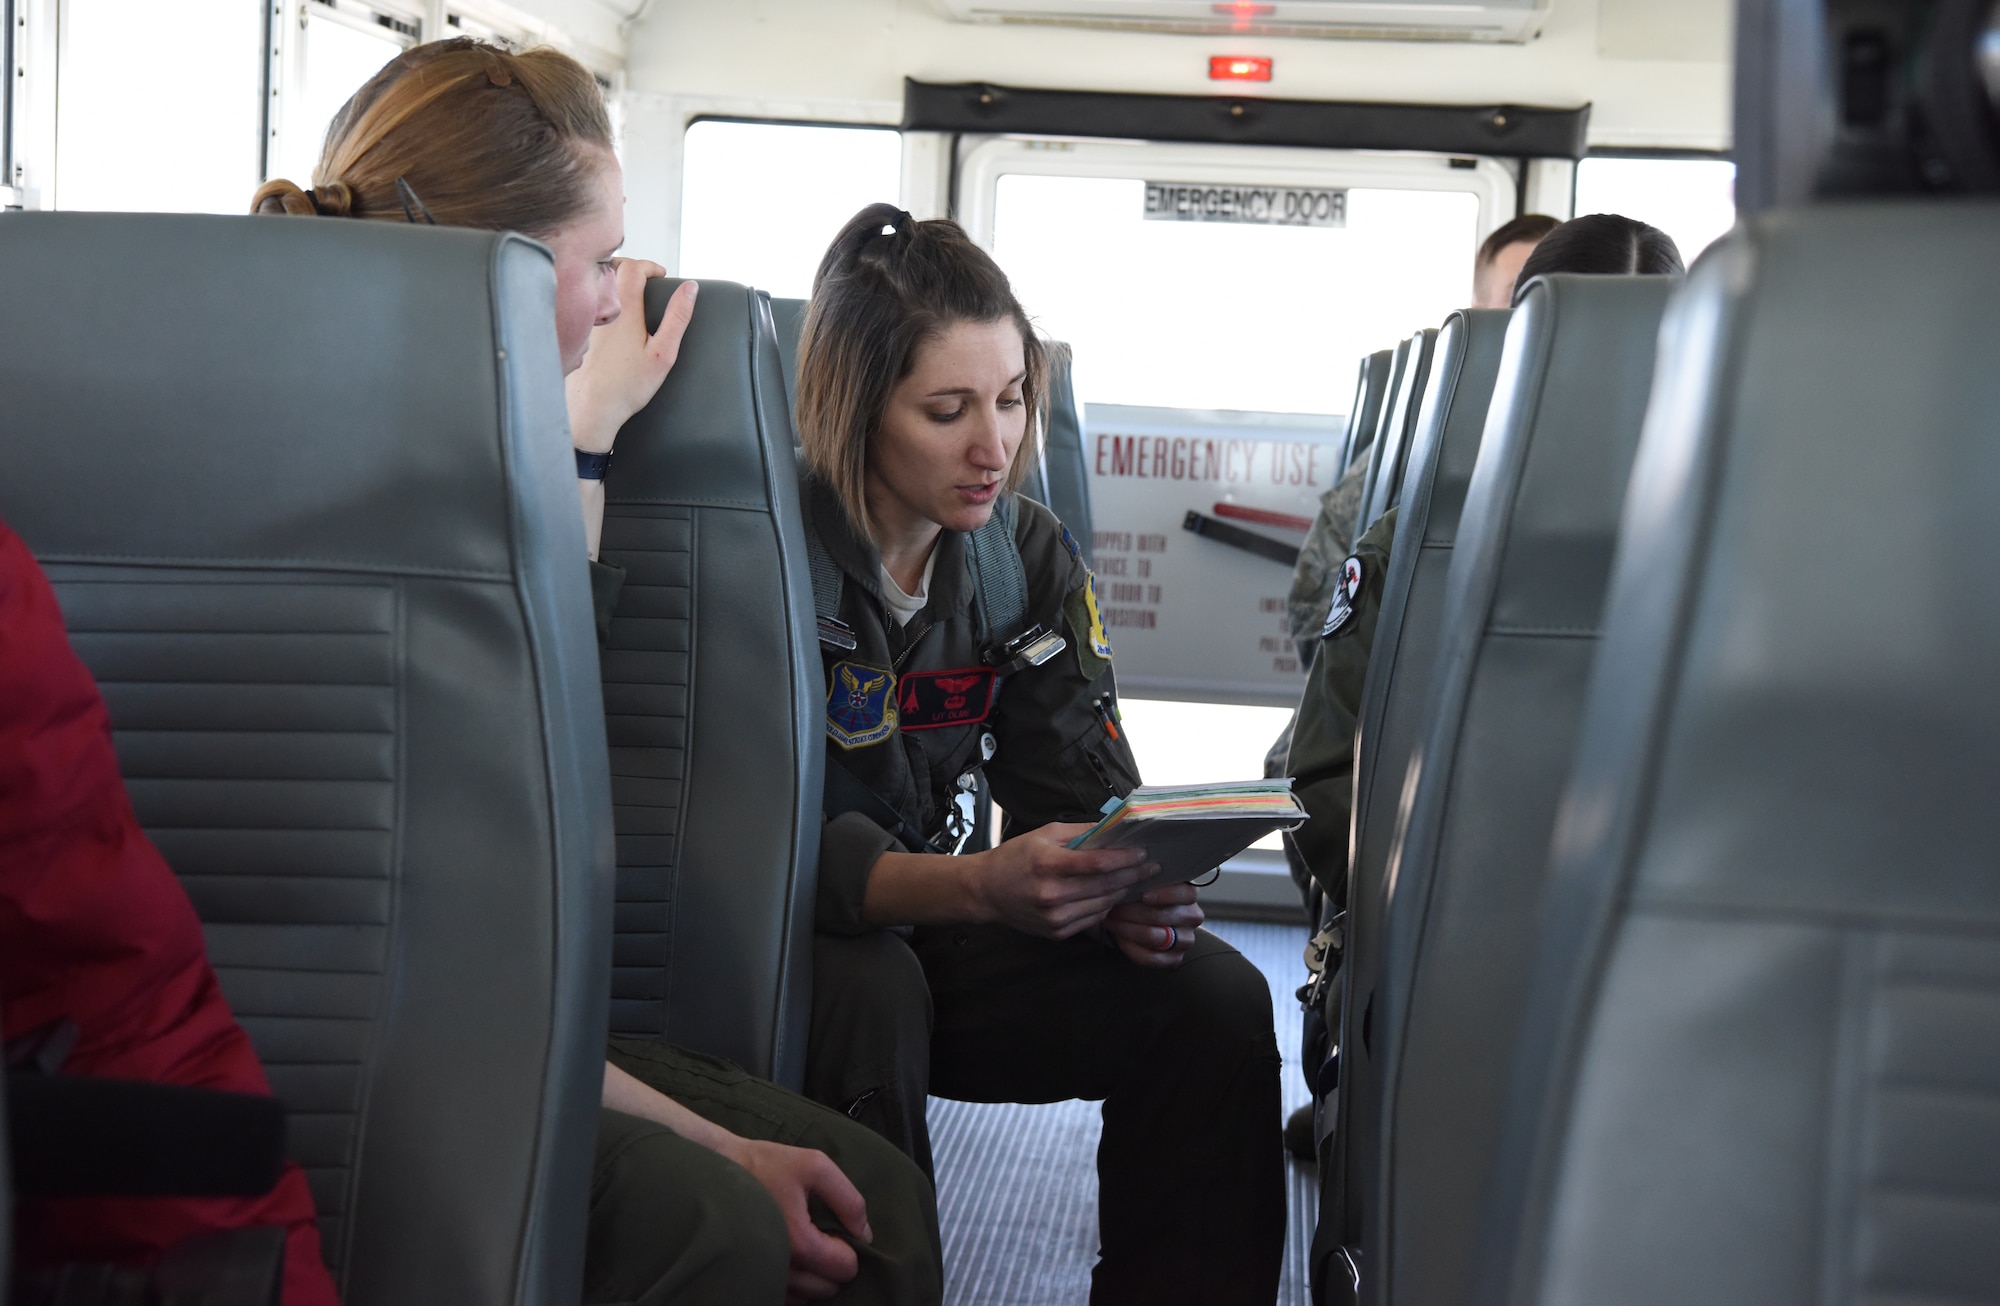 Capt. Danielle Zidack, a 34th Bomb Squadron weapon systems officer, and Capt. Lauren Olme, a 34th BS B-1 pilot, go over their checklists prior to an all-female flight out of Ellsworth Air Force Base, S.D., March 21, 2018. The flight was in honor of Women’s History Month and consisted of routine training in the local area. (U.S. Air Force photo by Staff Sgt. Jette Carr)